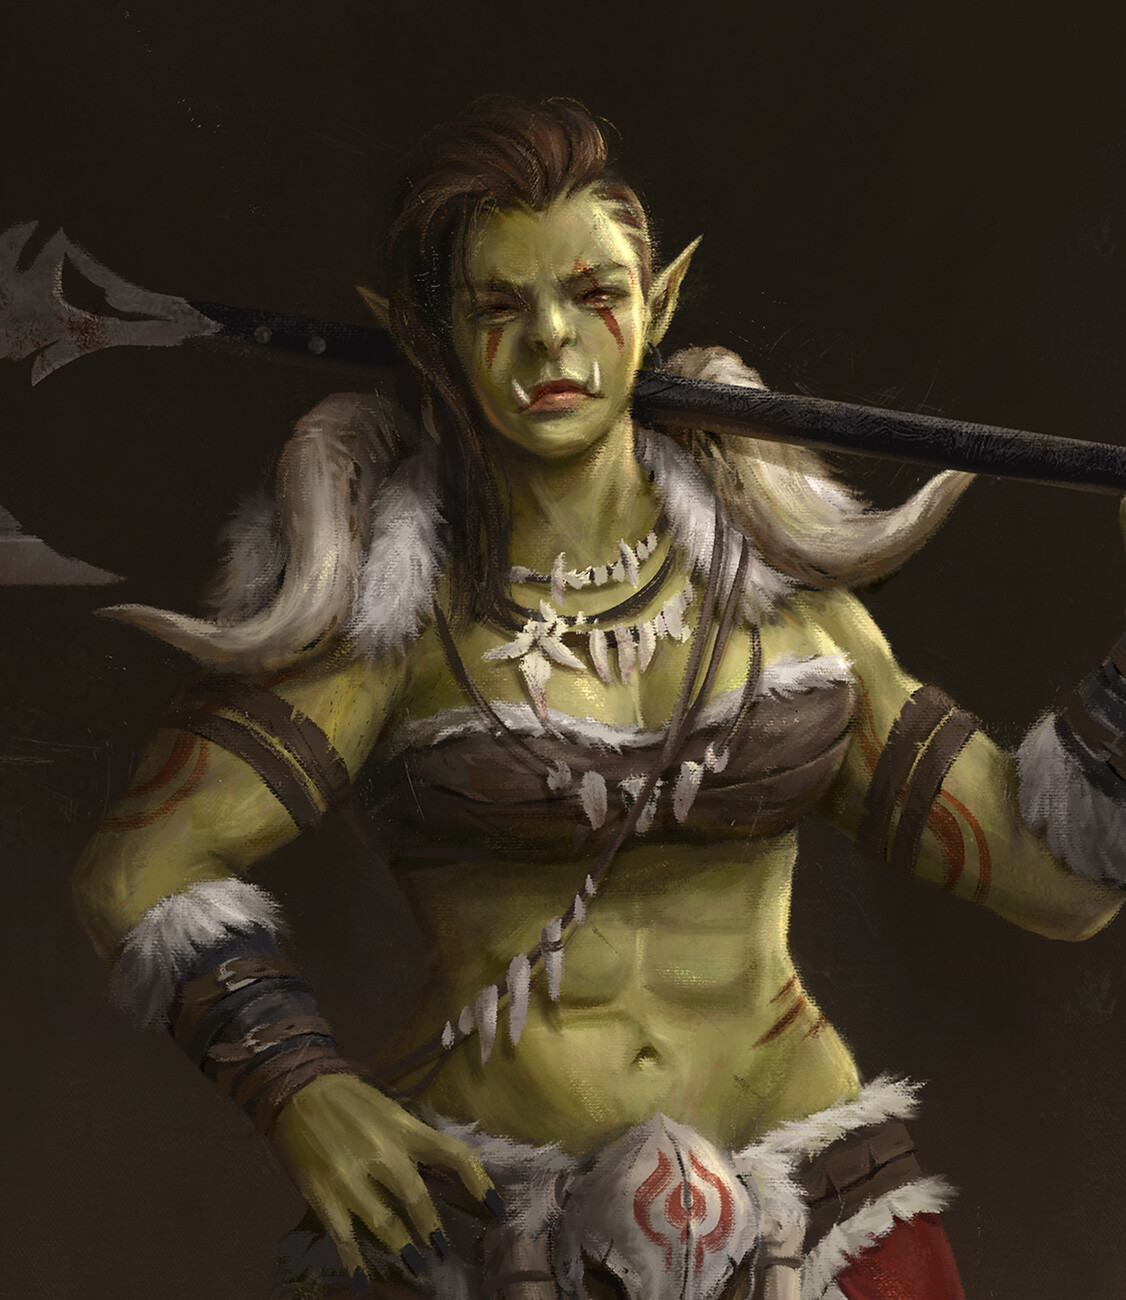 Pervy Elf And The Serious Orc